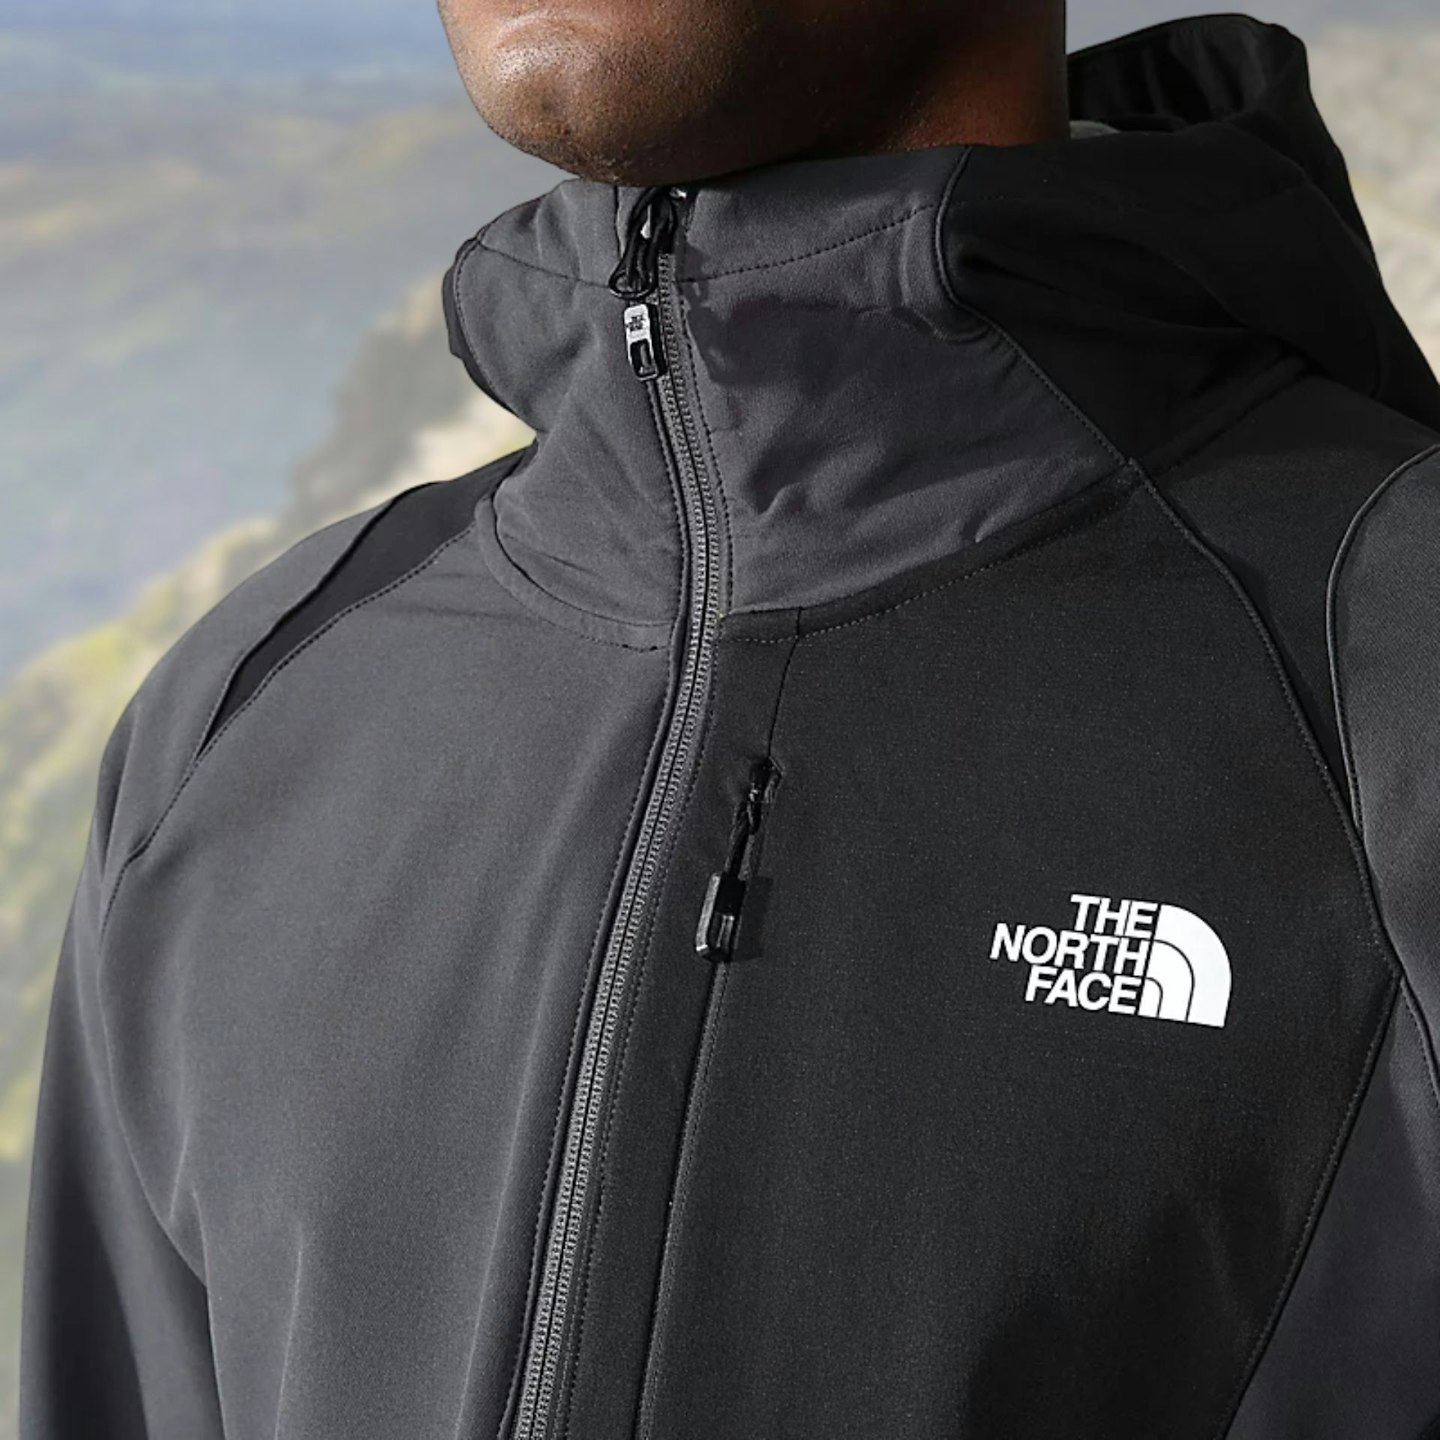 The North Face Athletic Outdoor Softshell Hoodie chest pocket